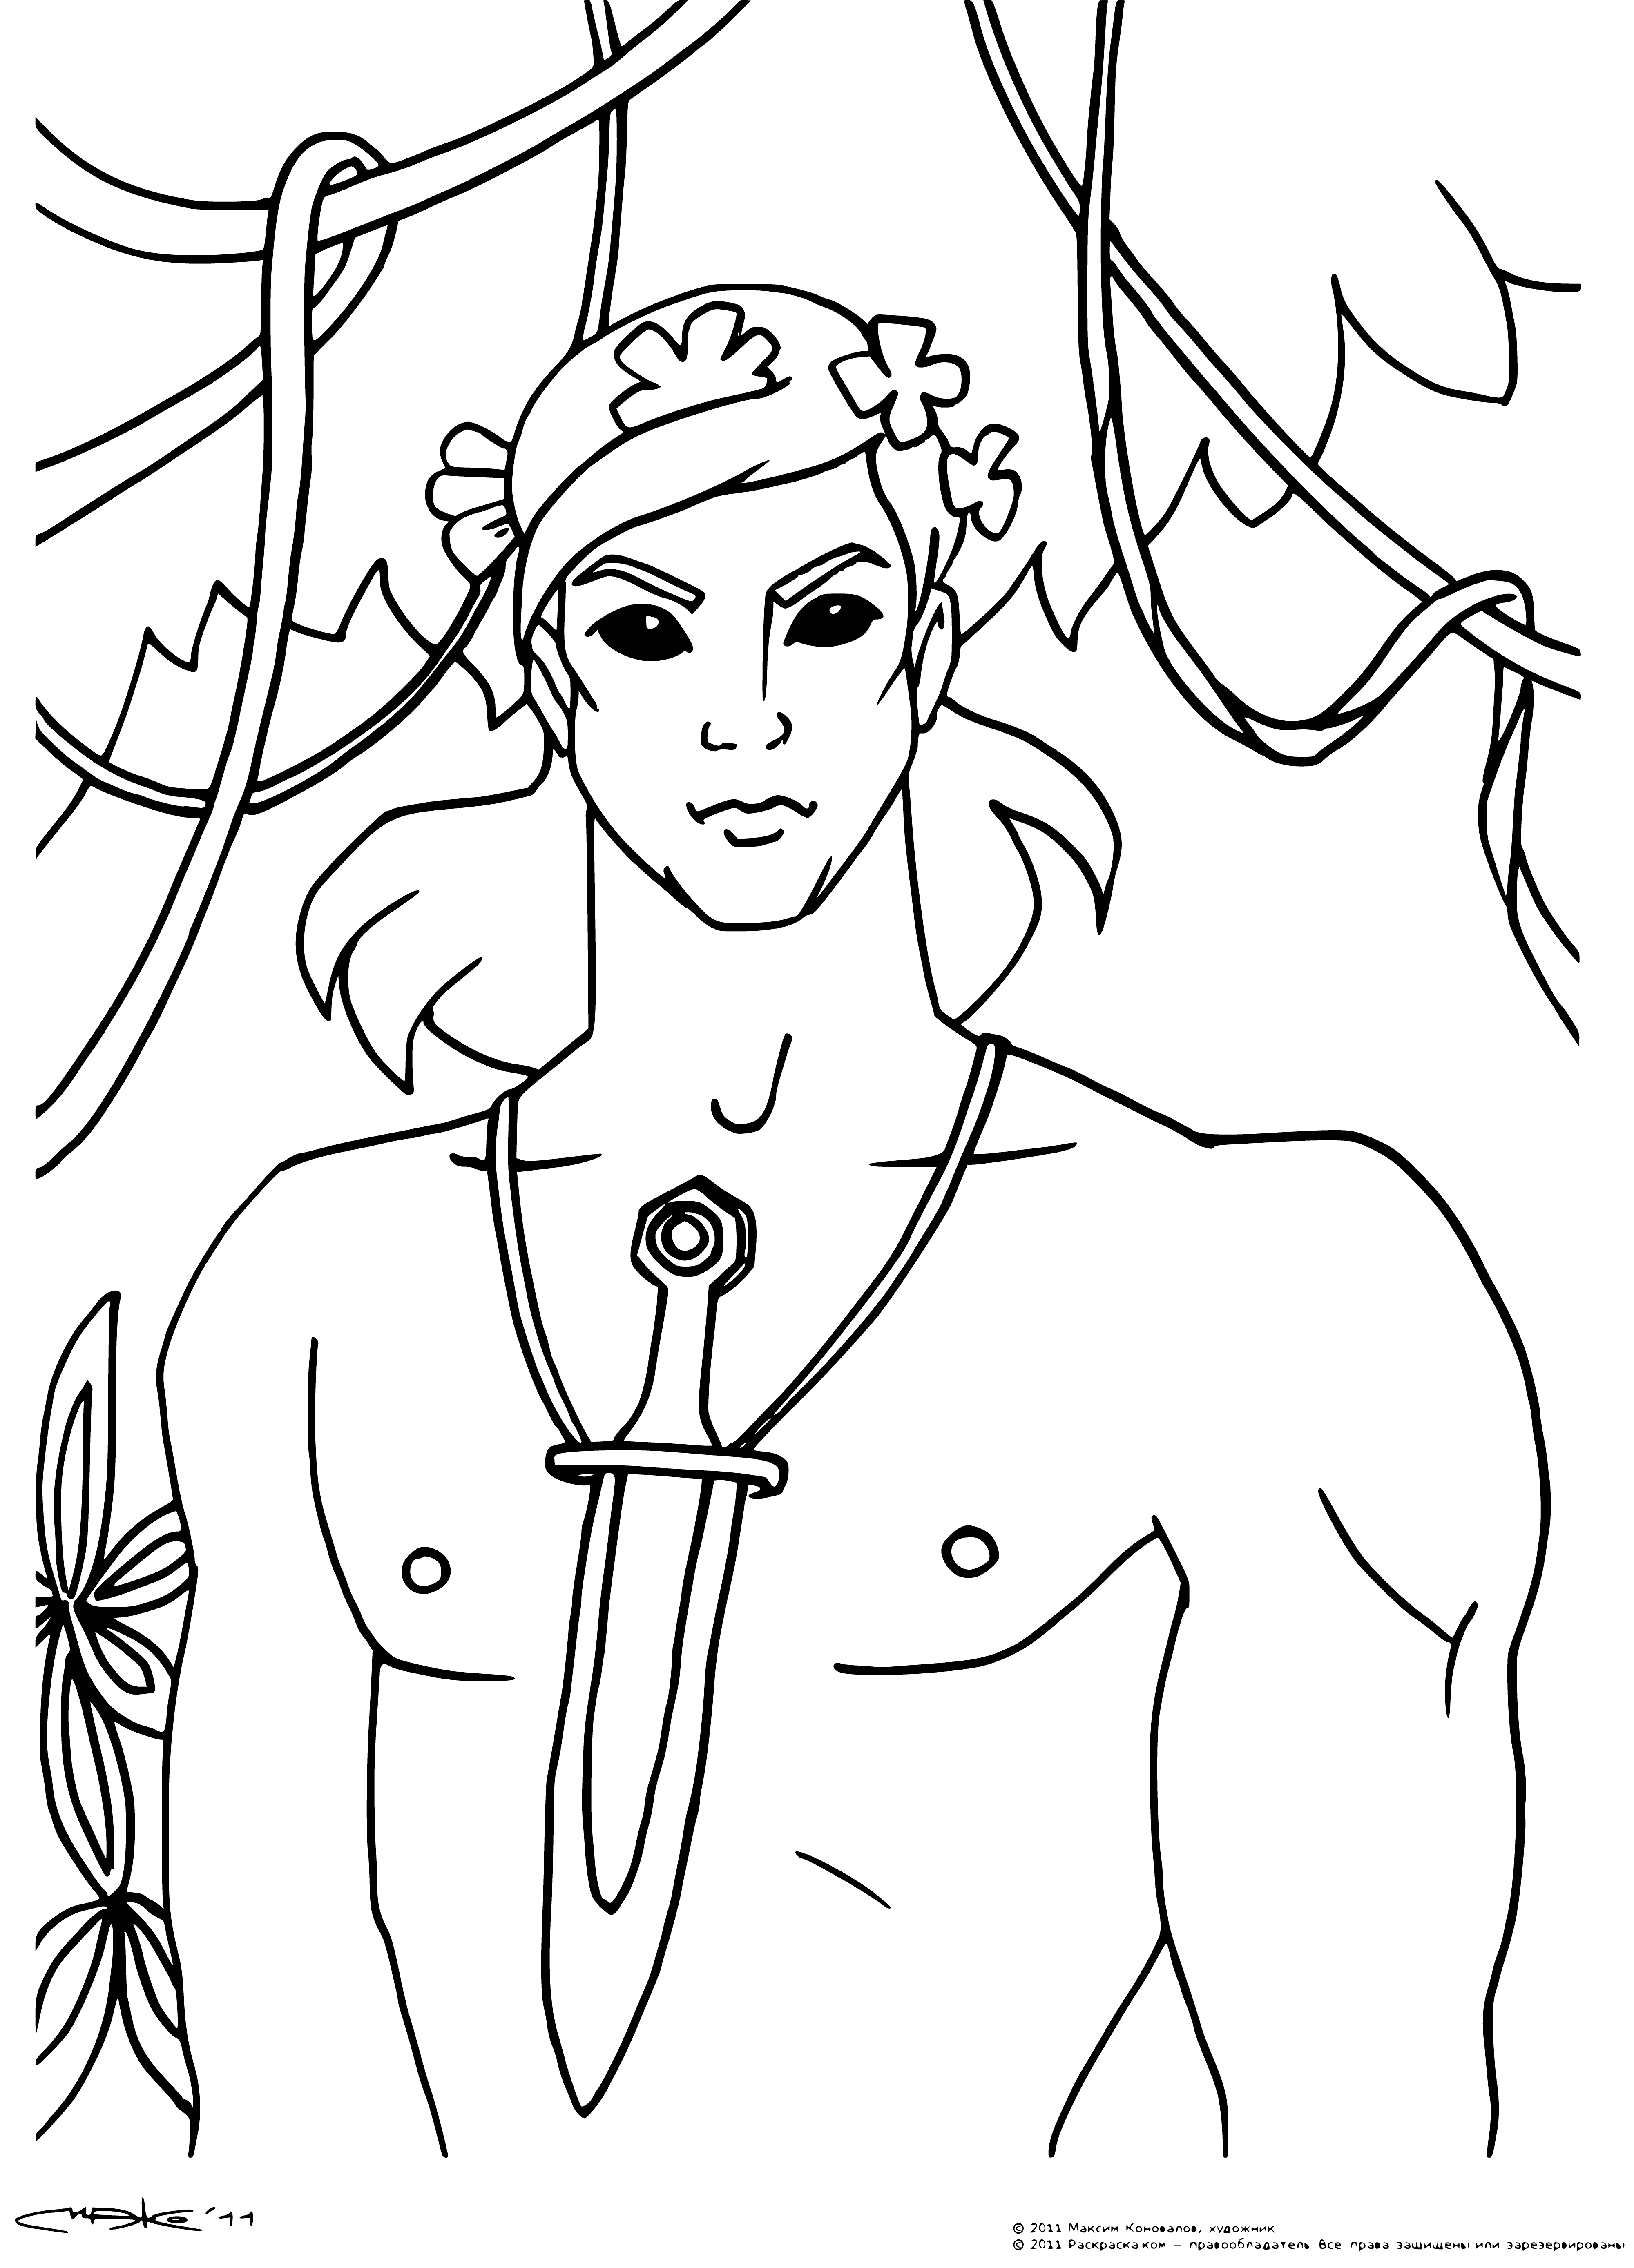 coloring page: Mowgli wearing a loincloth, necklace, holding a staff and knife with a fierce expression.